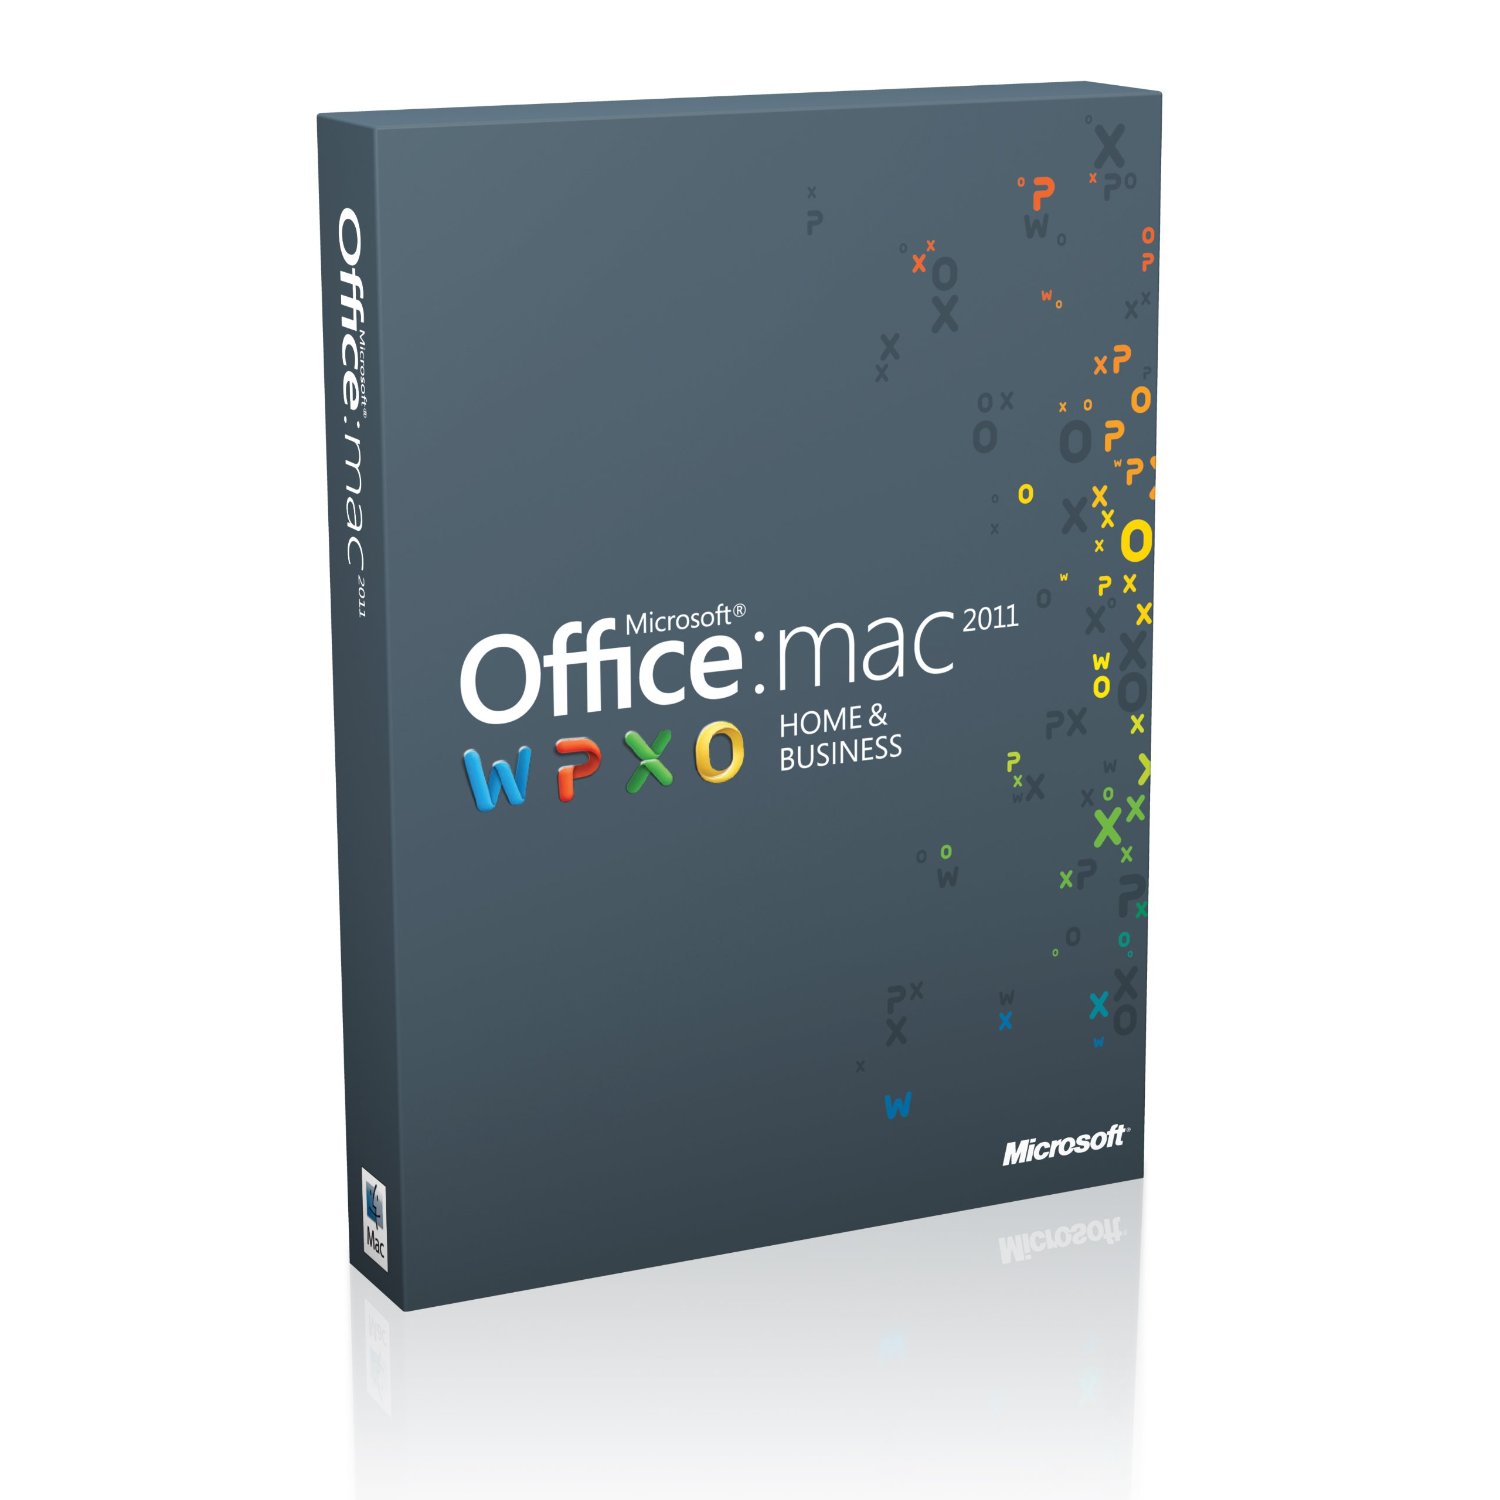 Ms office 2011 for mac